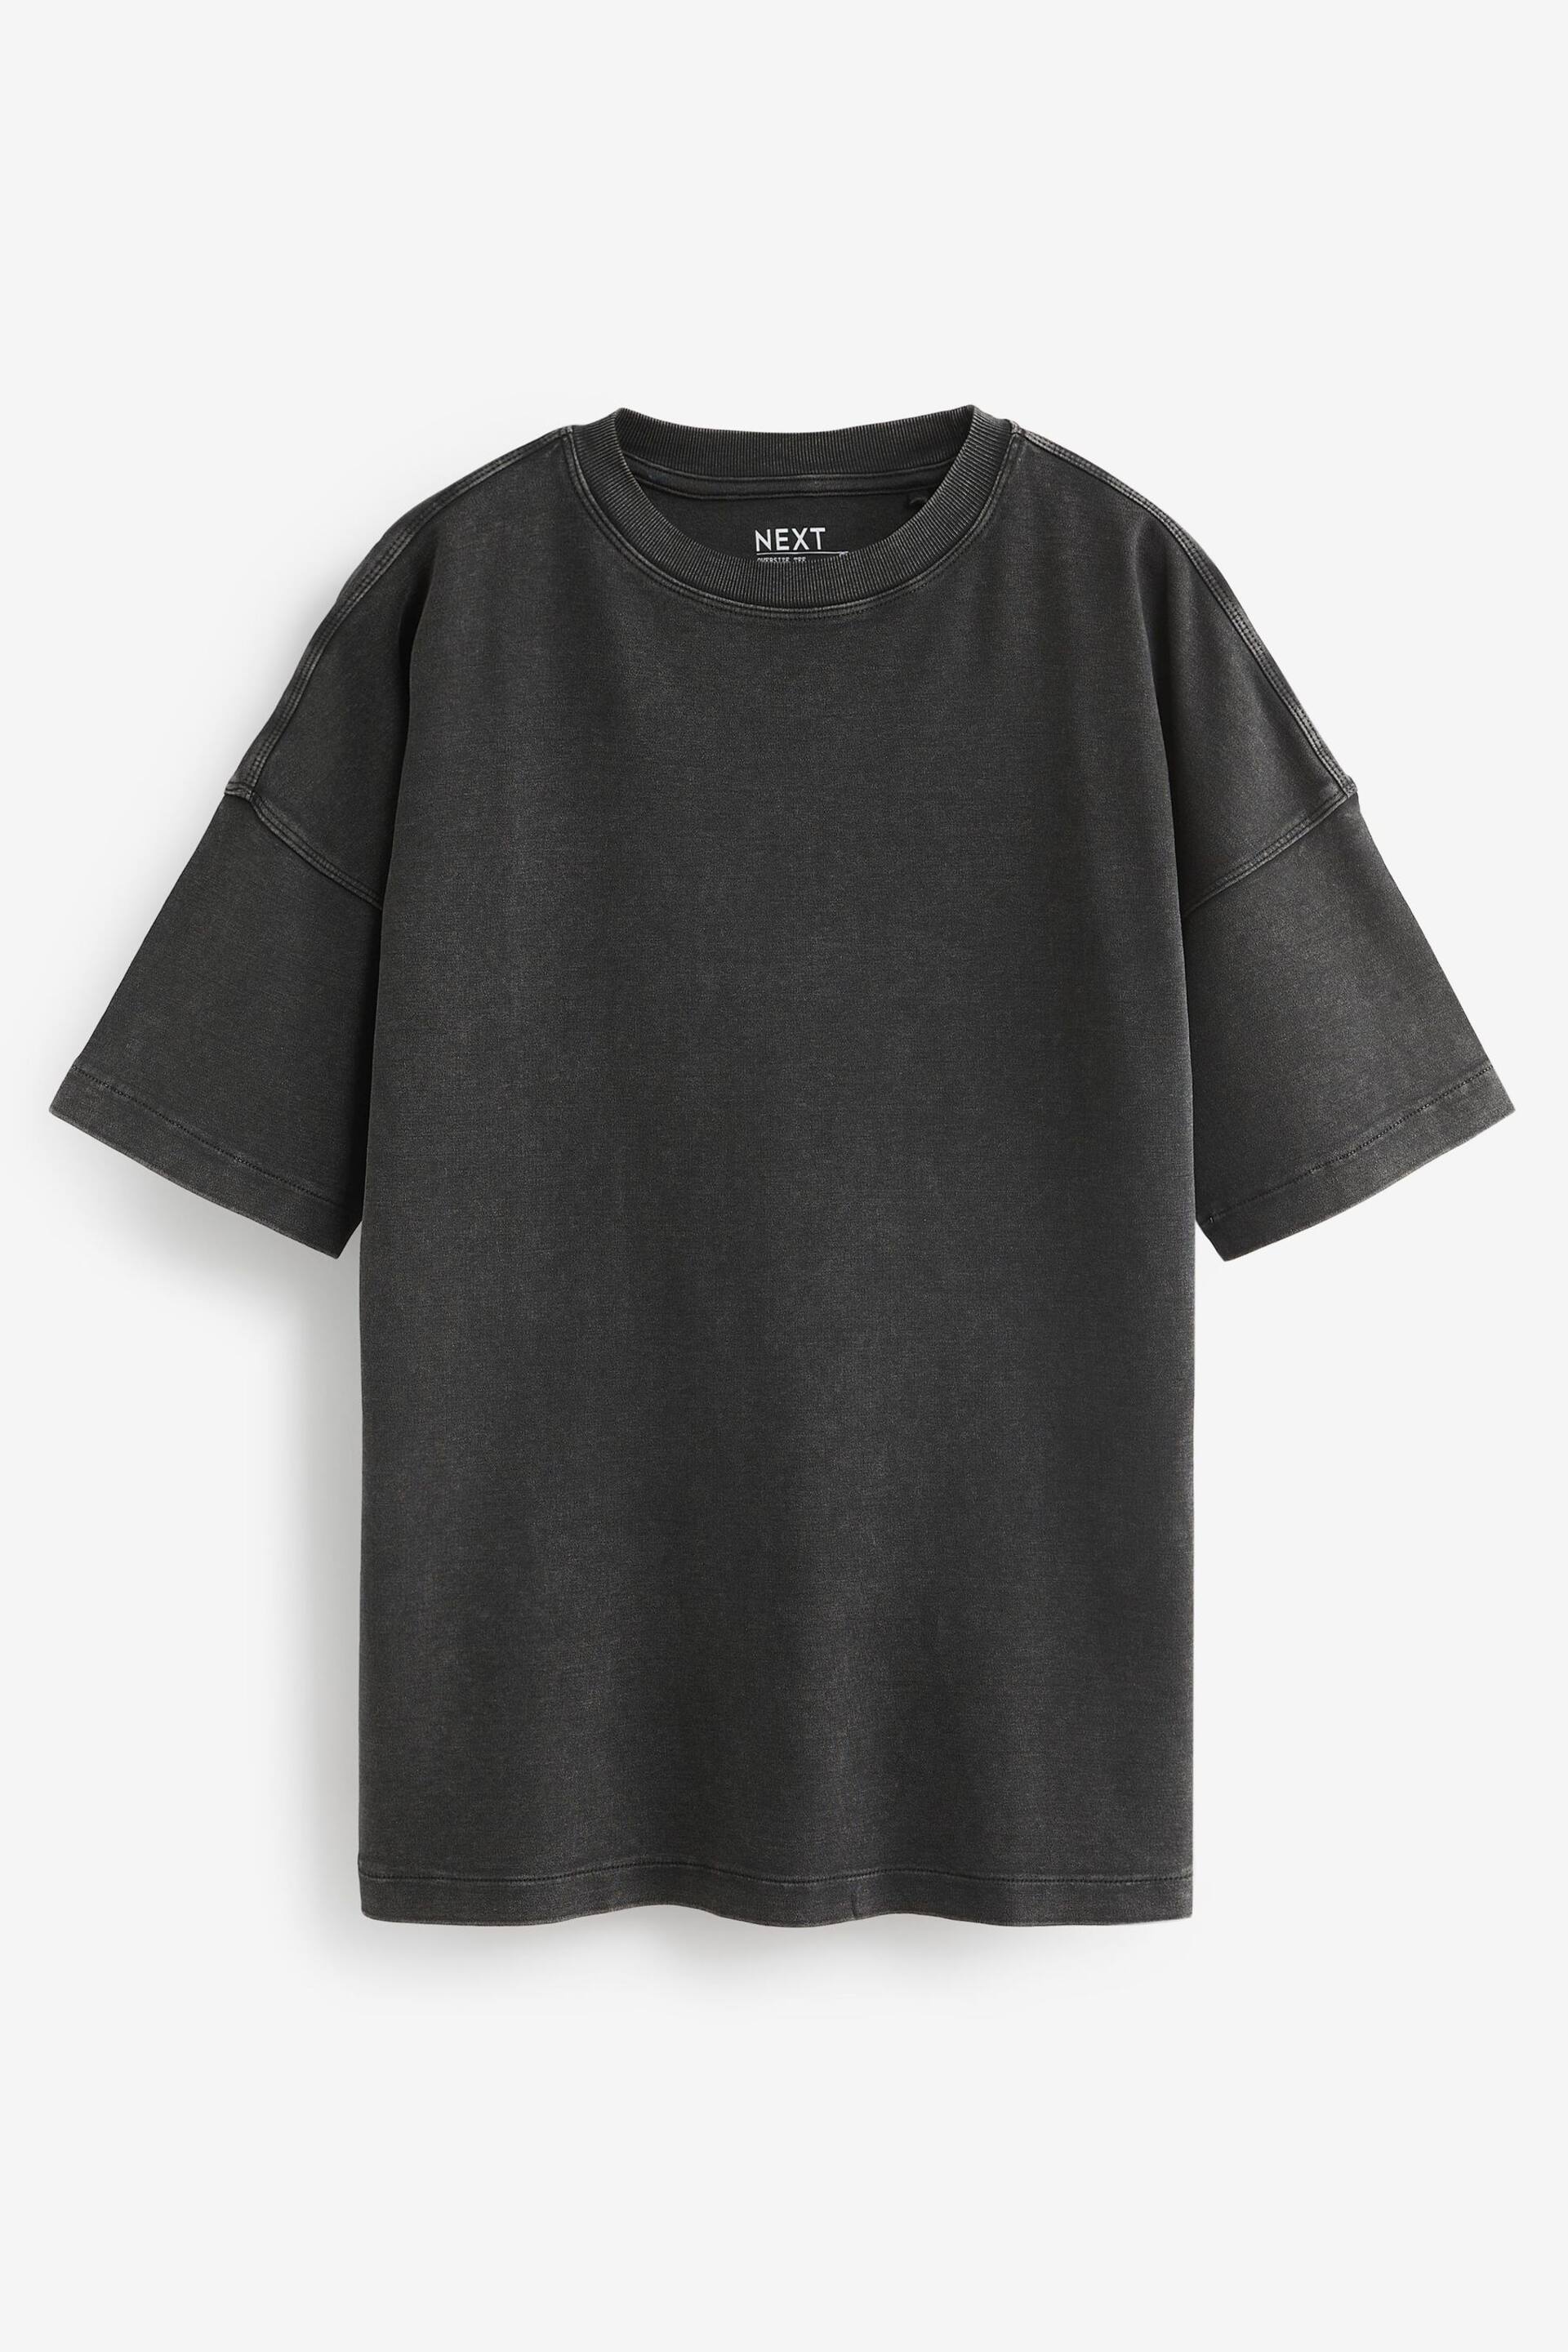 Charcoal Grey 100% Cotton Heavyweight Longline Relaxed Fit Crew Neck T-Shirt - Image 7 of 7